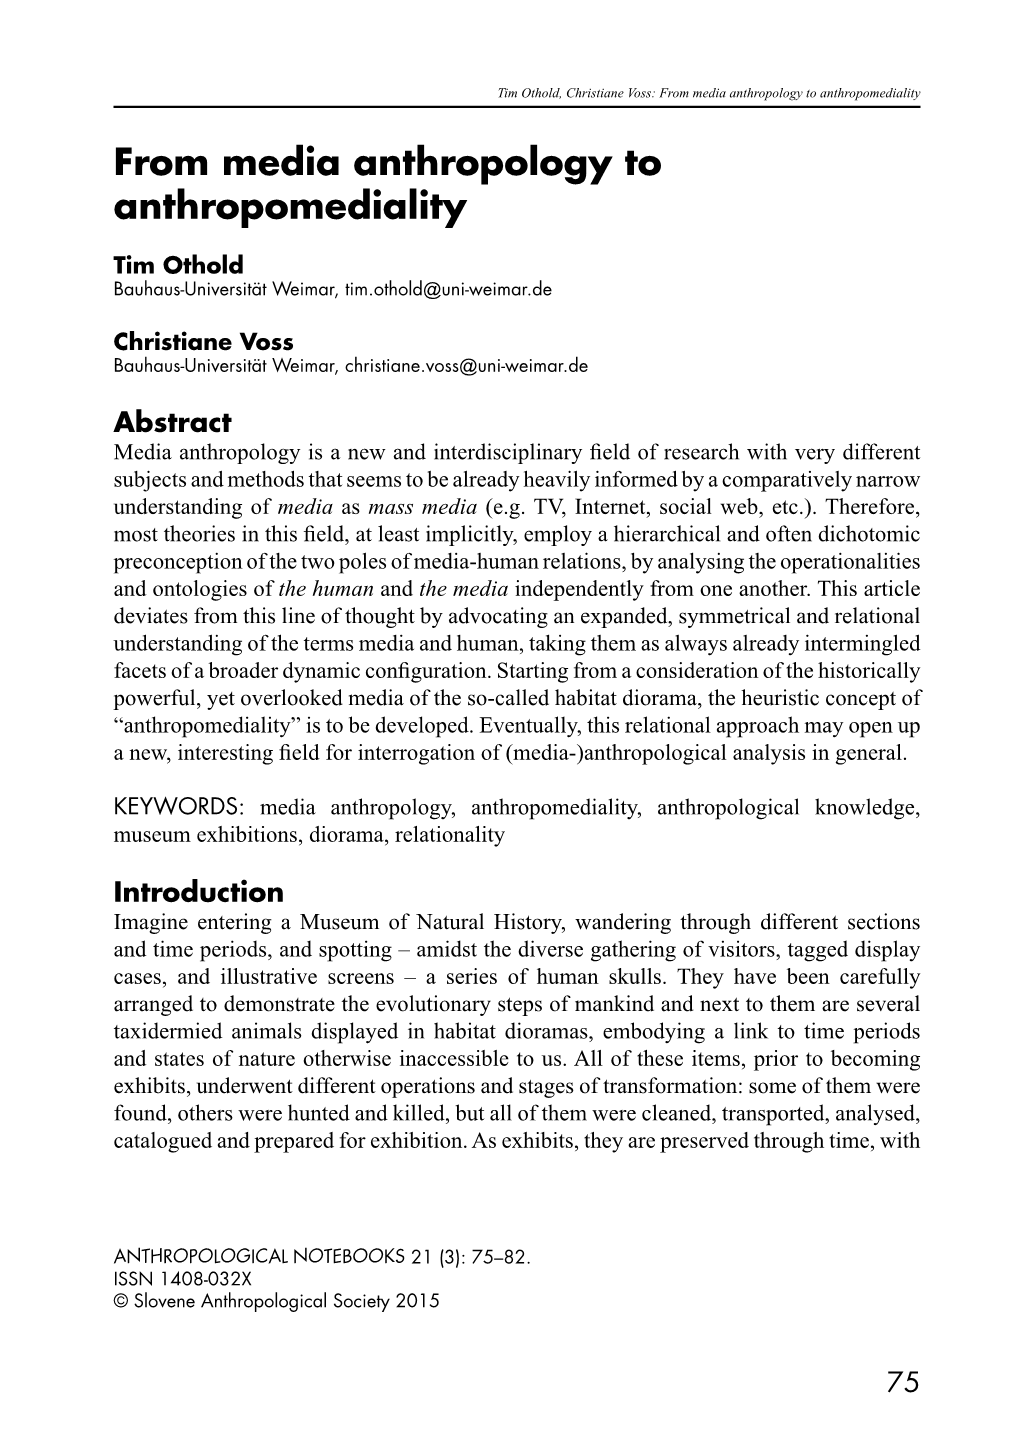 From Media Anthropology to Anthropomediality